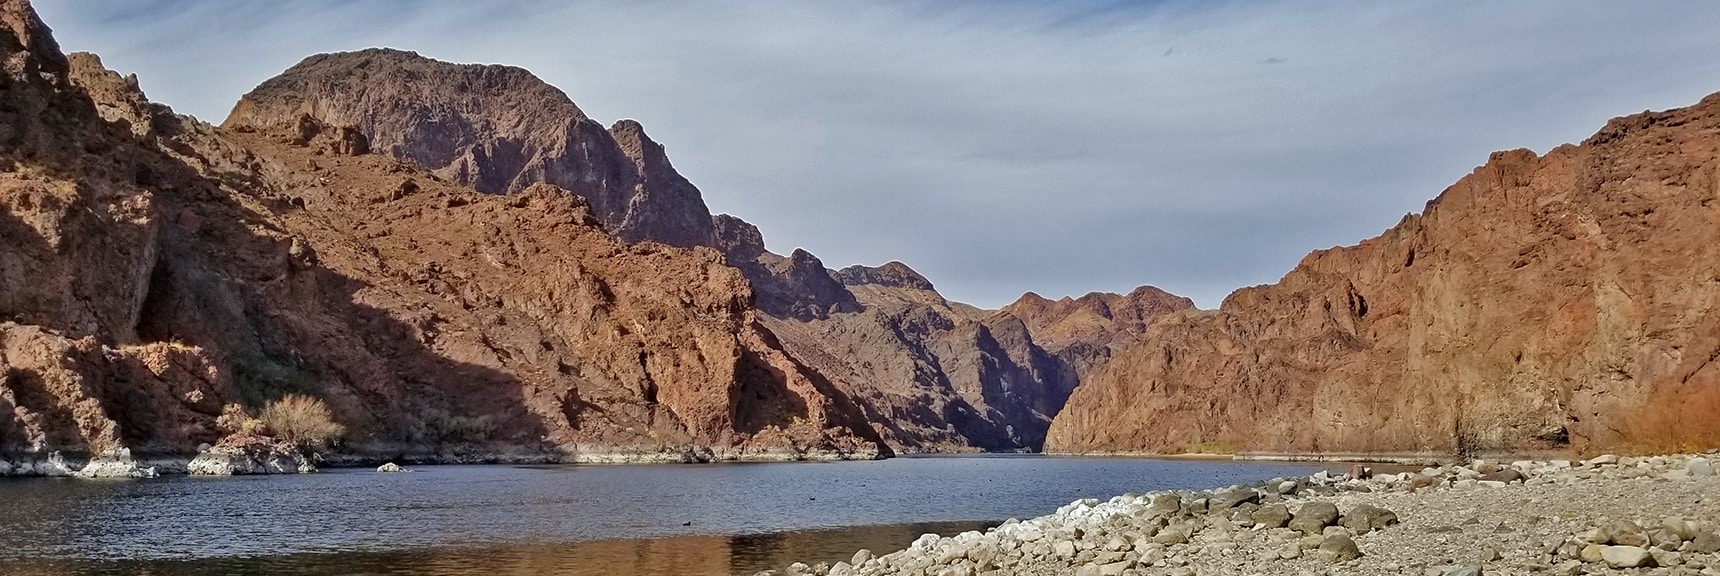 Arrival at the Colorado River at the Base of White Rock Canyon. | Arizona Hot Spring | Liberty Bell Arch | Lake Mead National Recreation Area, Arizona